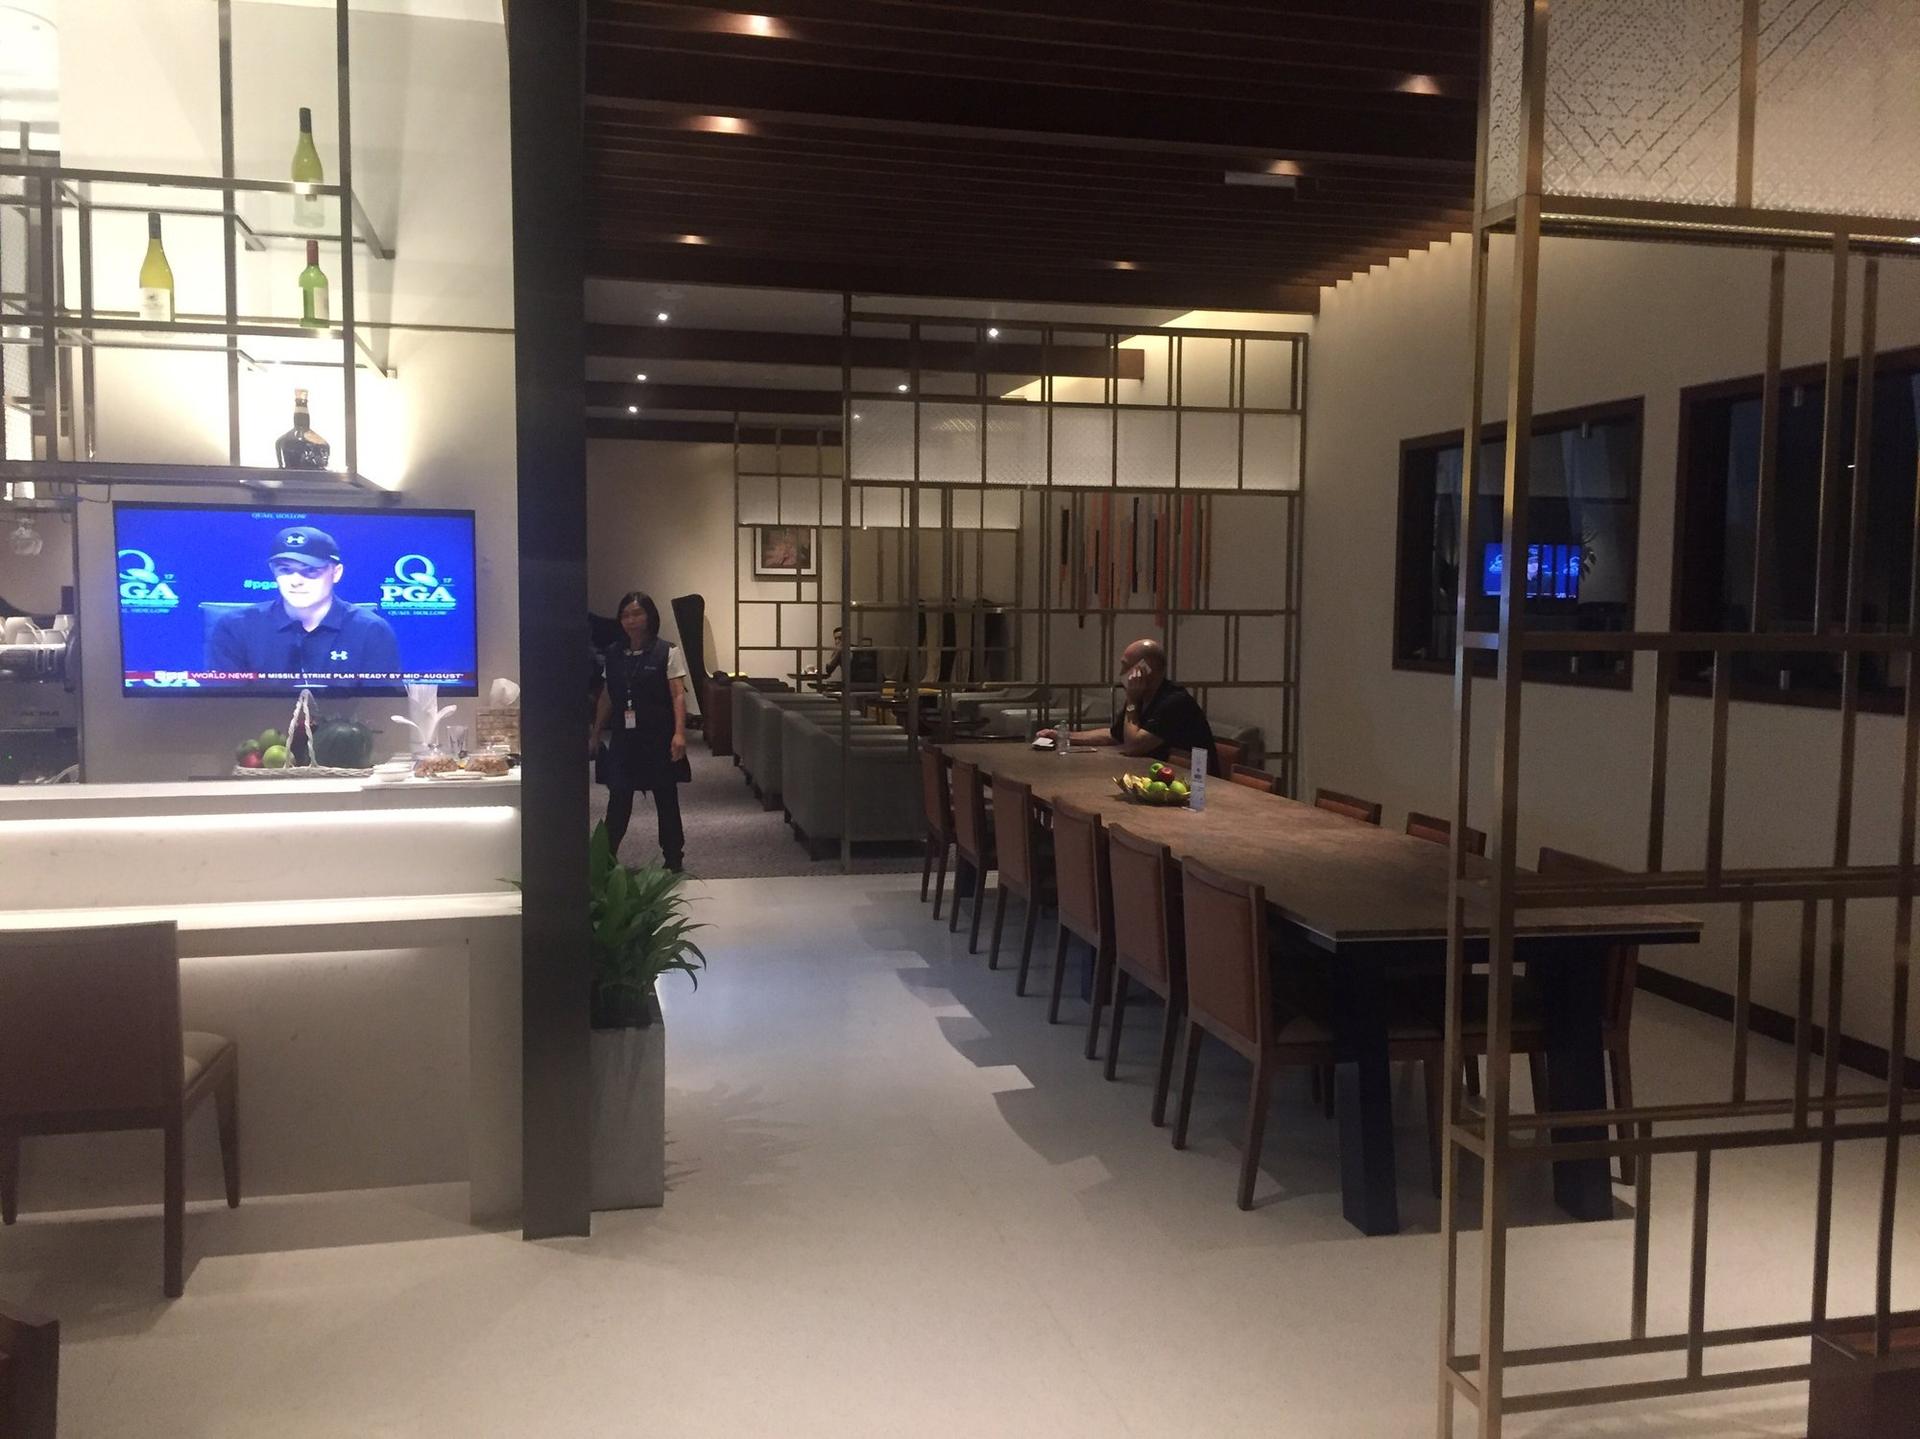 Singapore Airlines SilverKris Business Class Lounge image 16 of 16